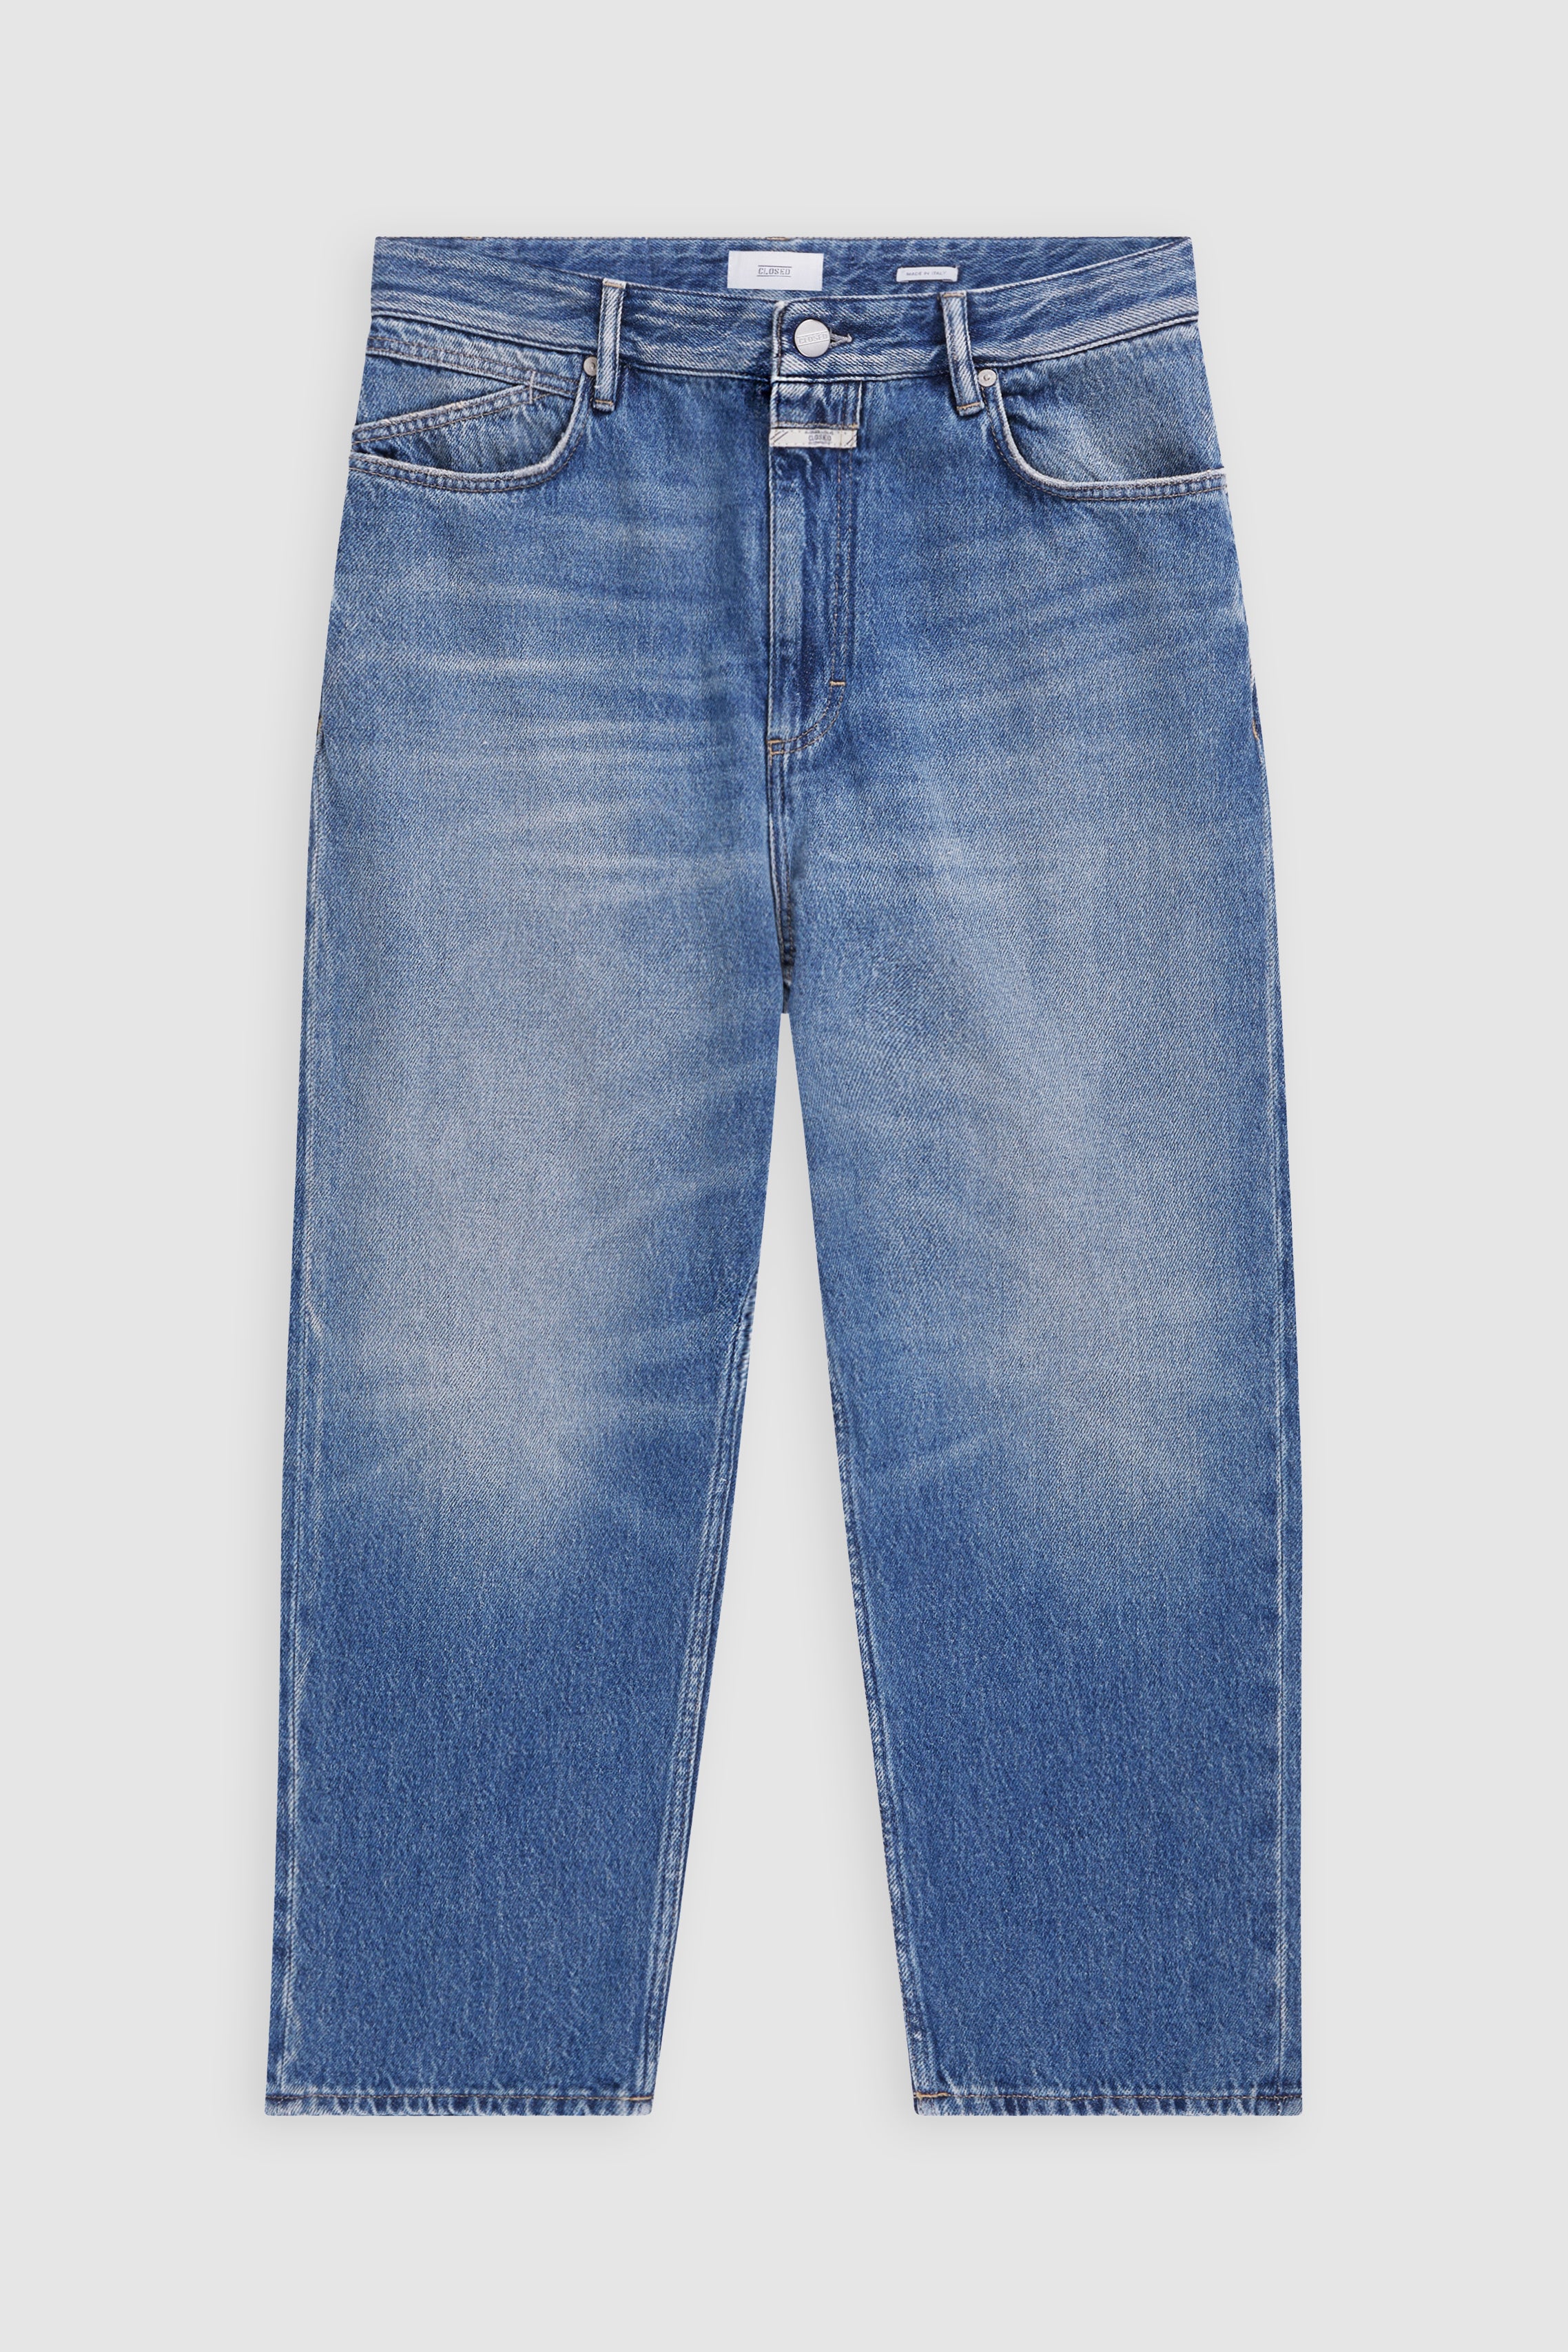 STYLE NAME SPRINGDALE RELAXED JEANS